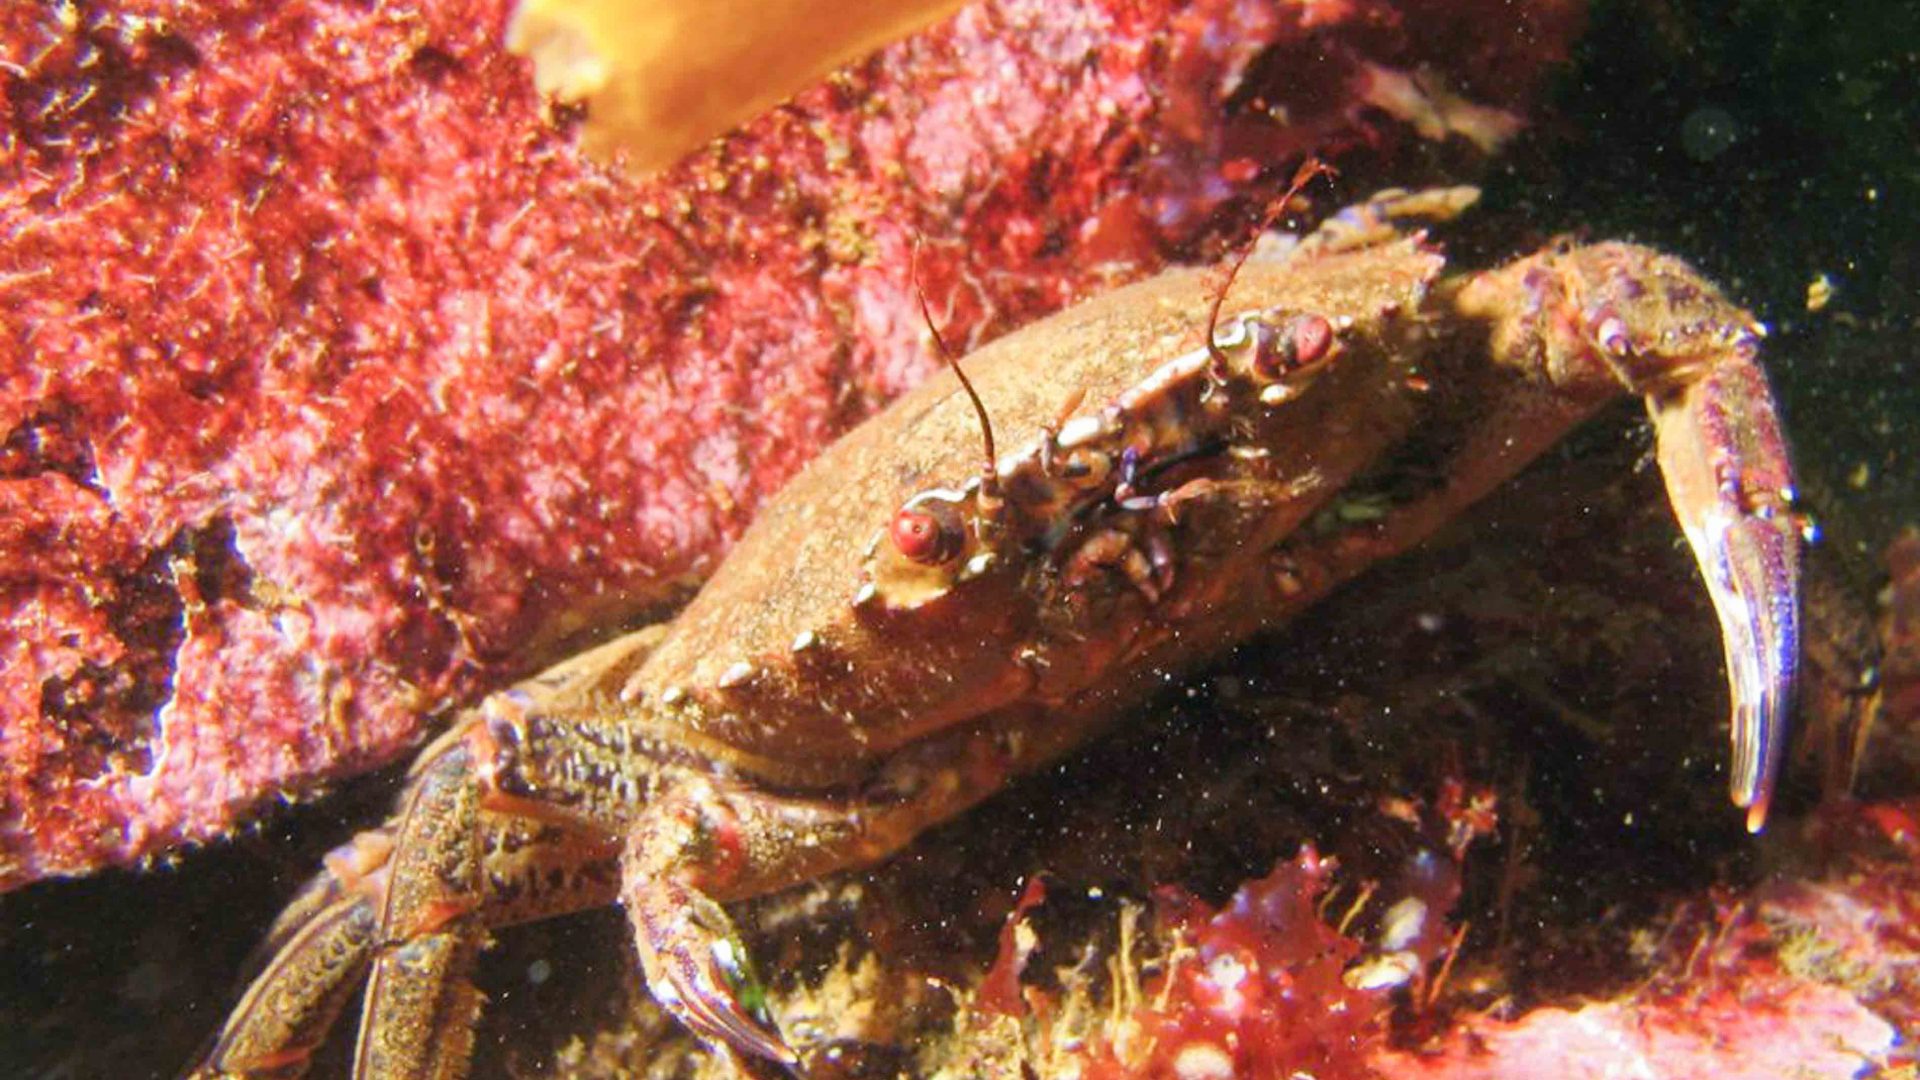 Snorkeling in Scotland; A crab peers out from a rock under the water in Scotland.